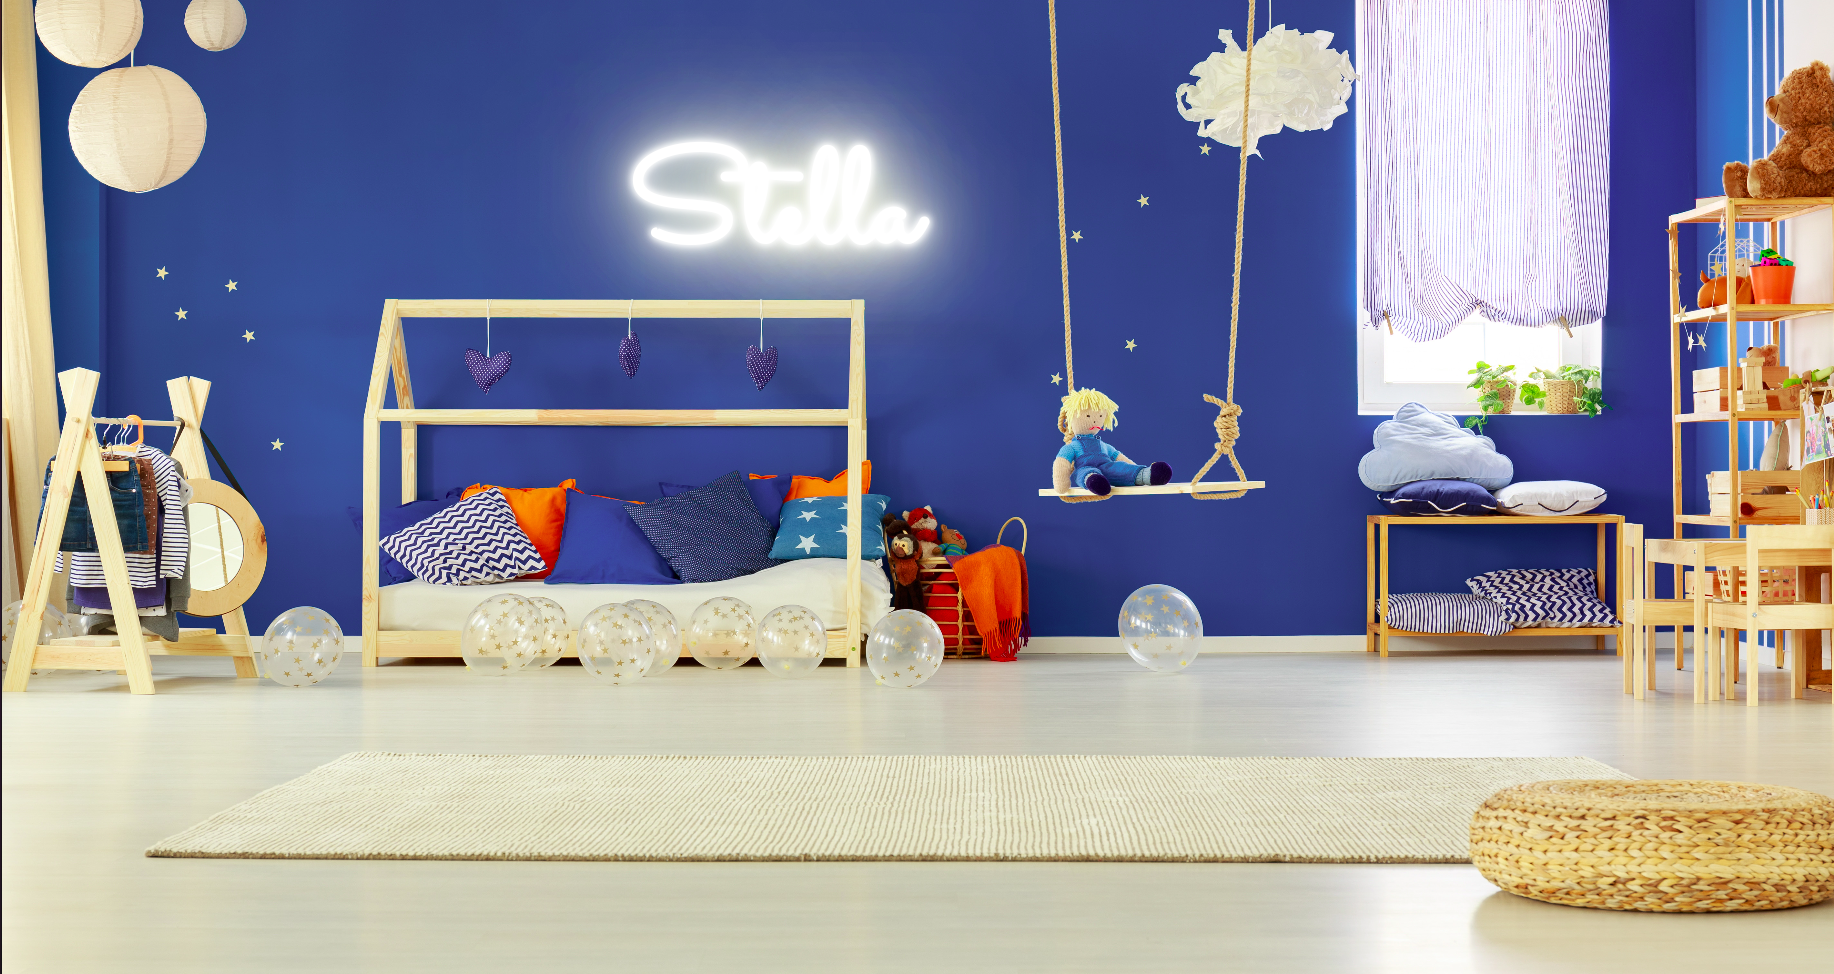 "Stella" Baby Name LED Neon Sign